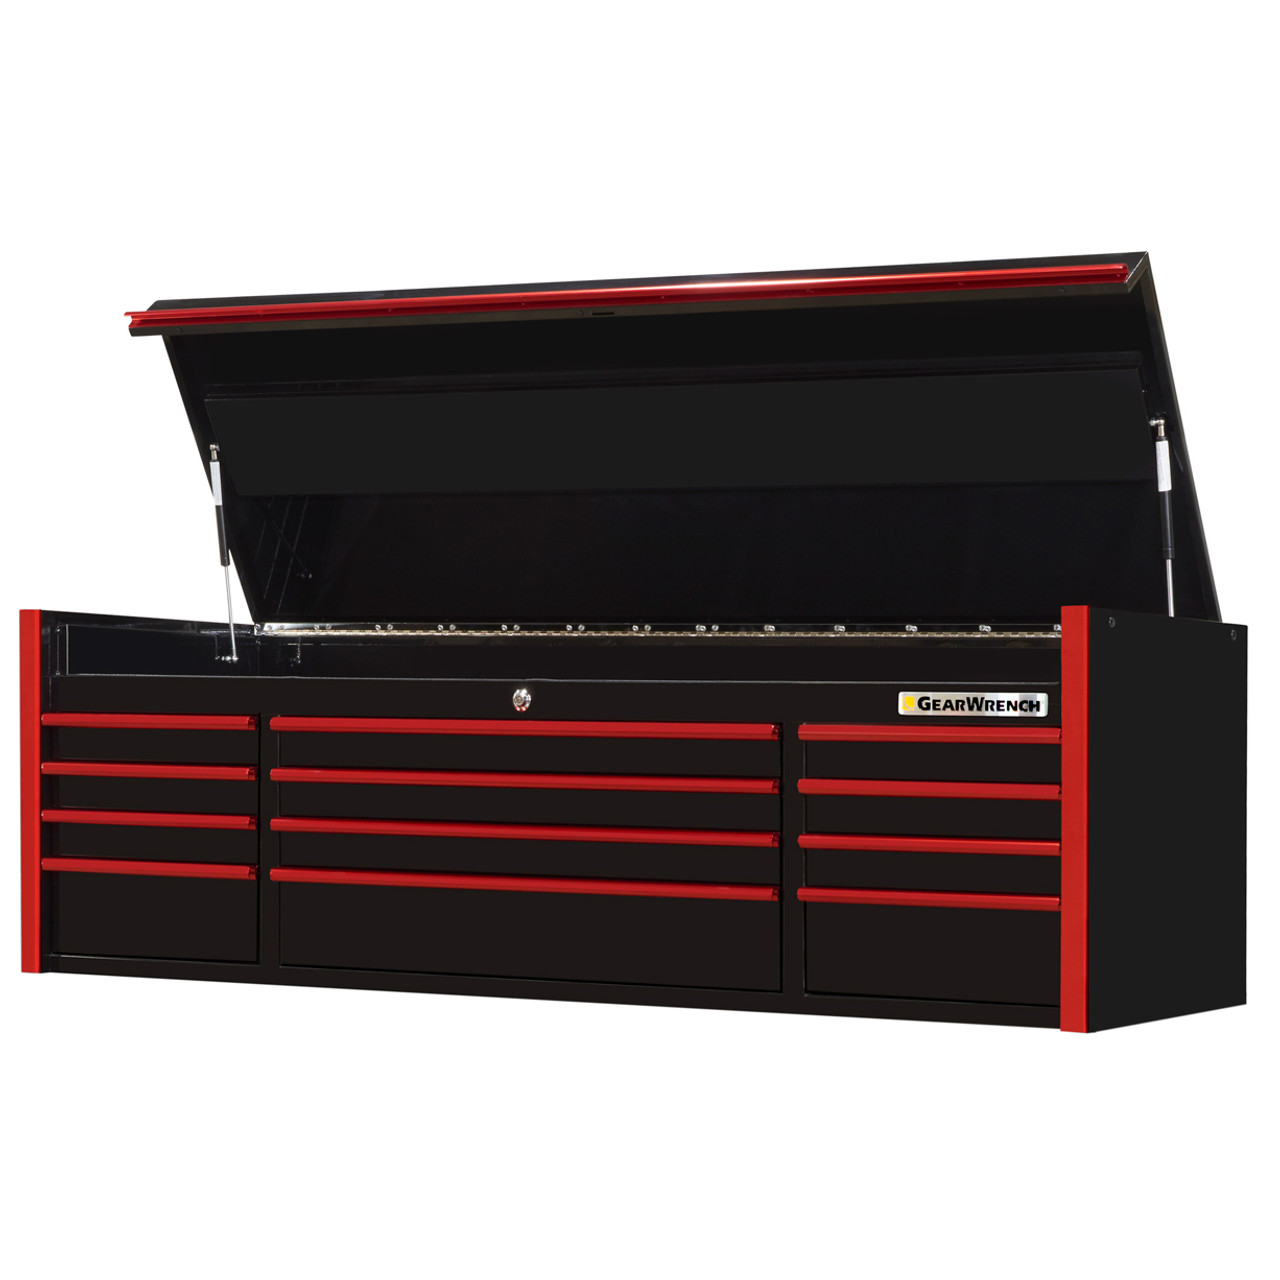 Gearwrench GW722512CHBKR by Extreme Tools 72" 12 Drawer Hutch Black with Red Handles and Trim